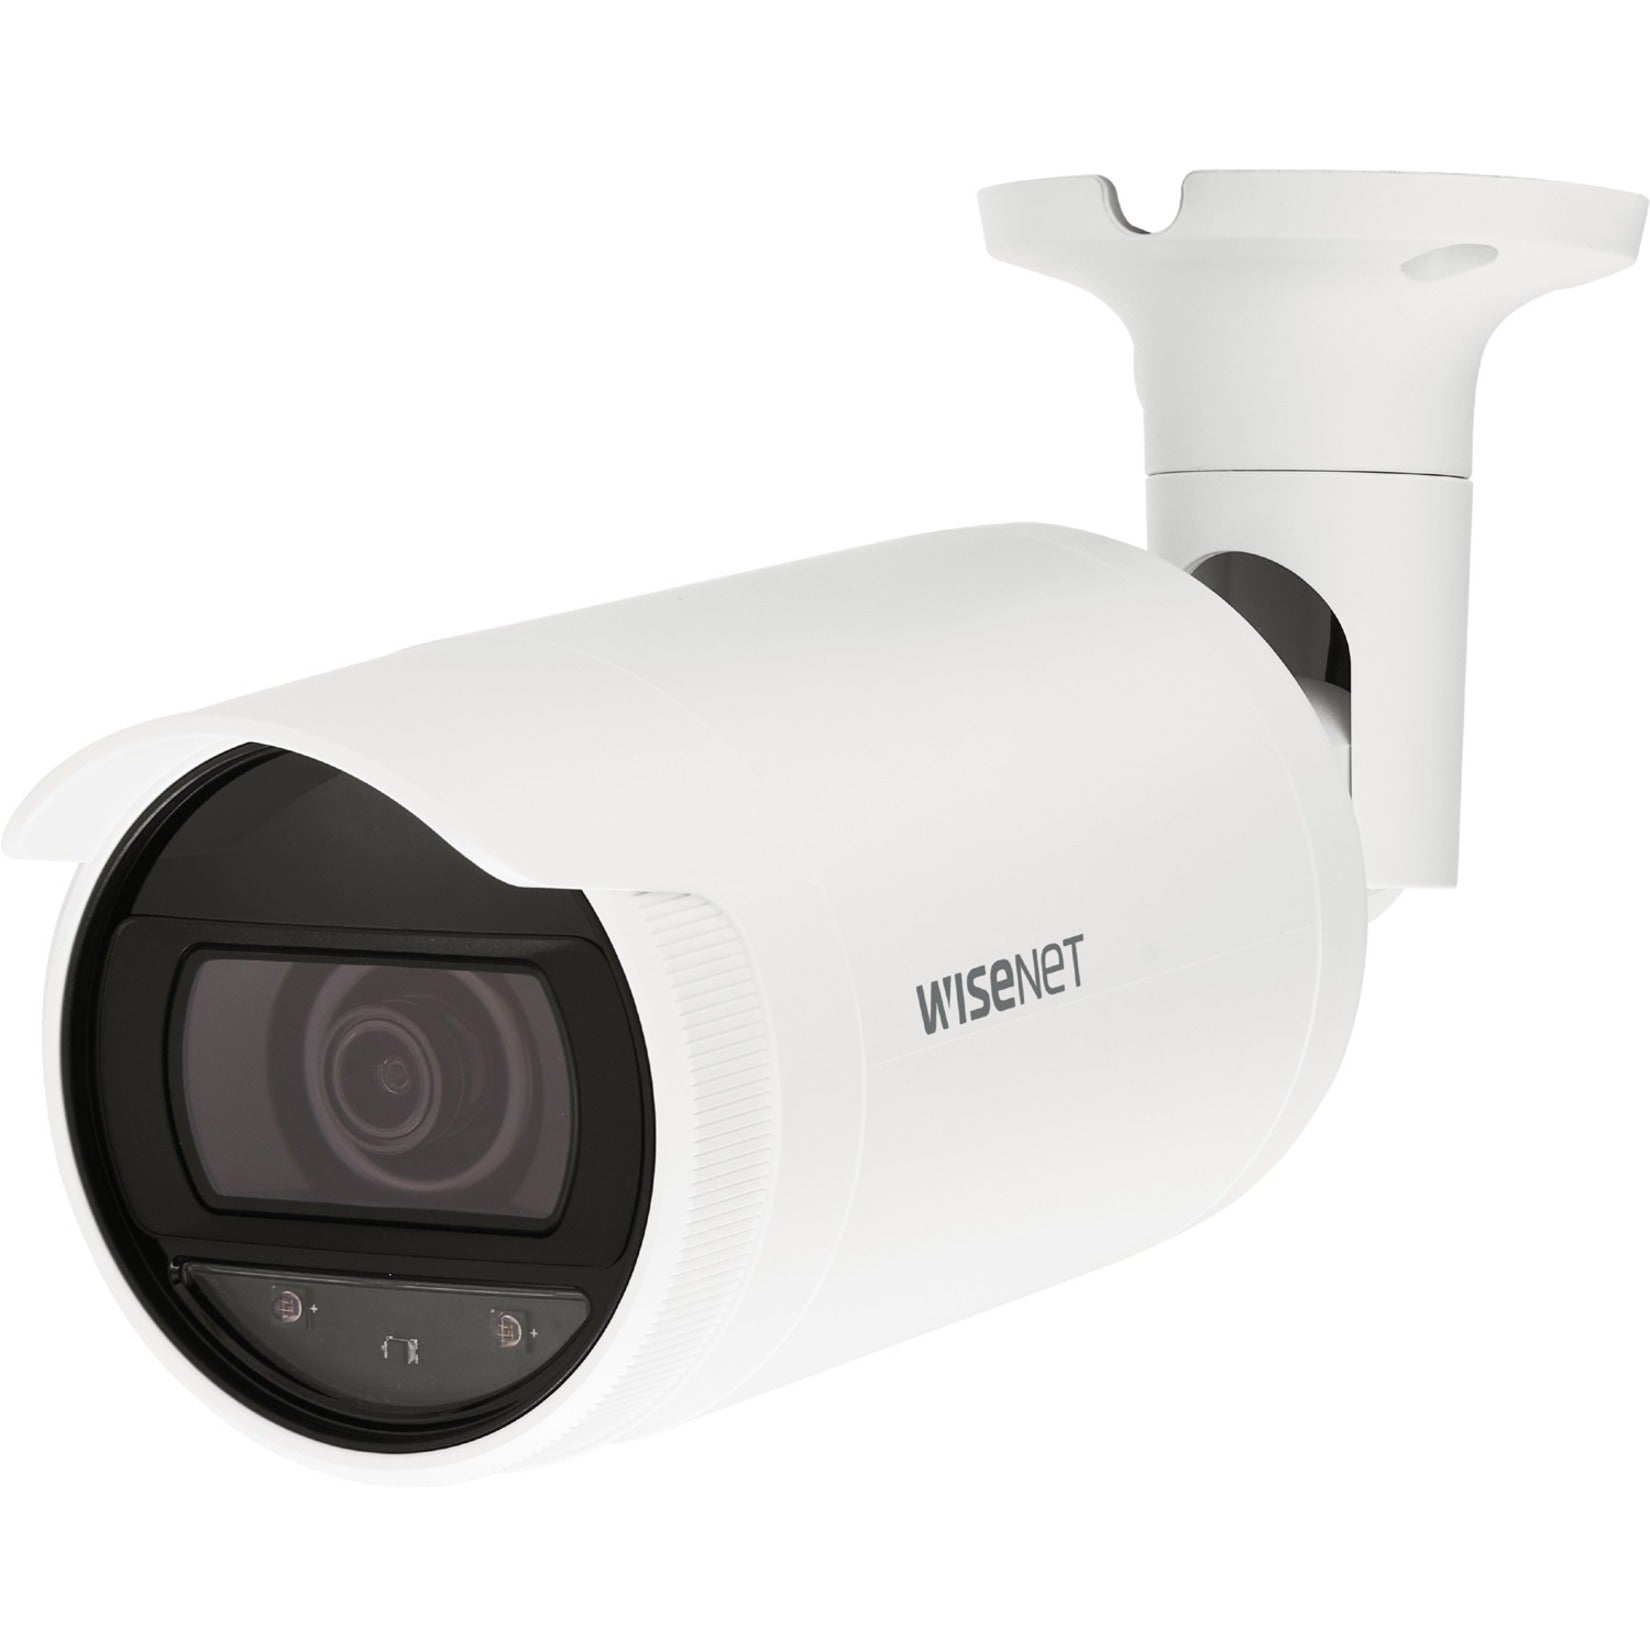 Wisenet ANO-L6022R 2MP IR Bullet Camera, Full HD, Color, Motion Detection, IP66